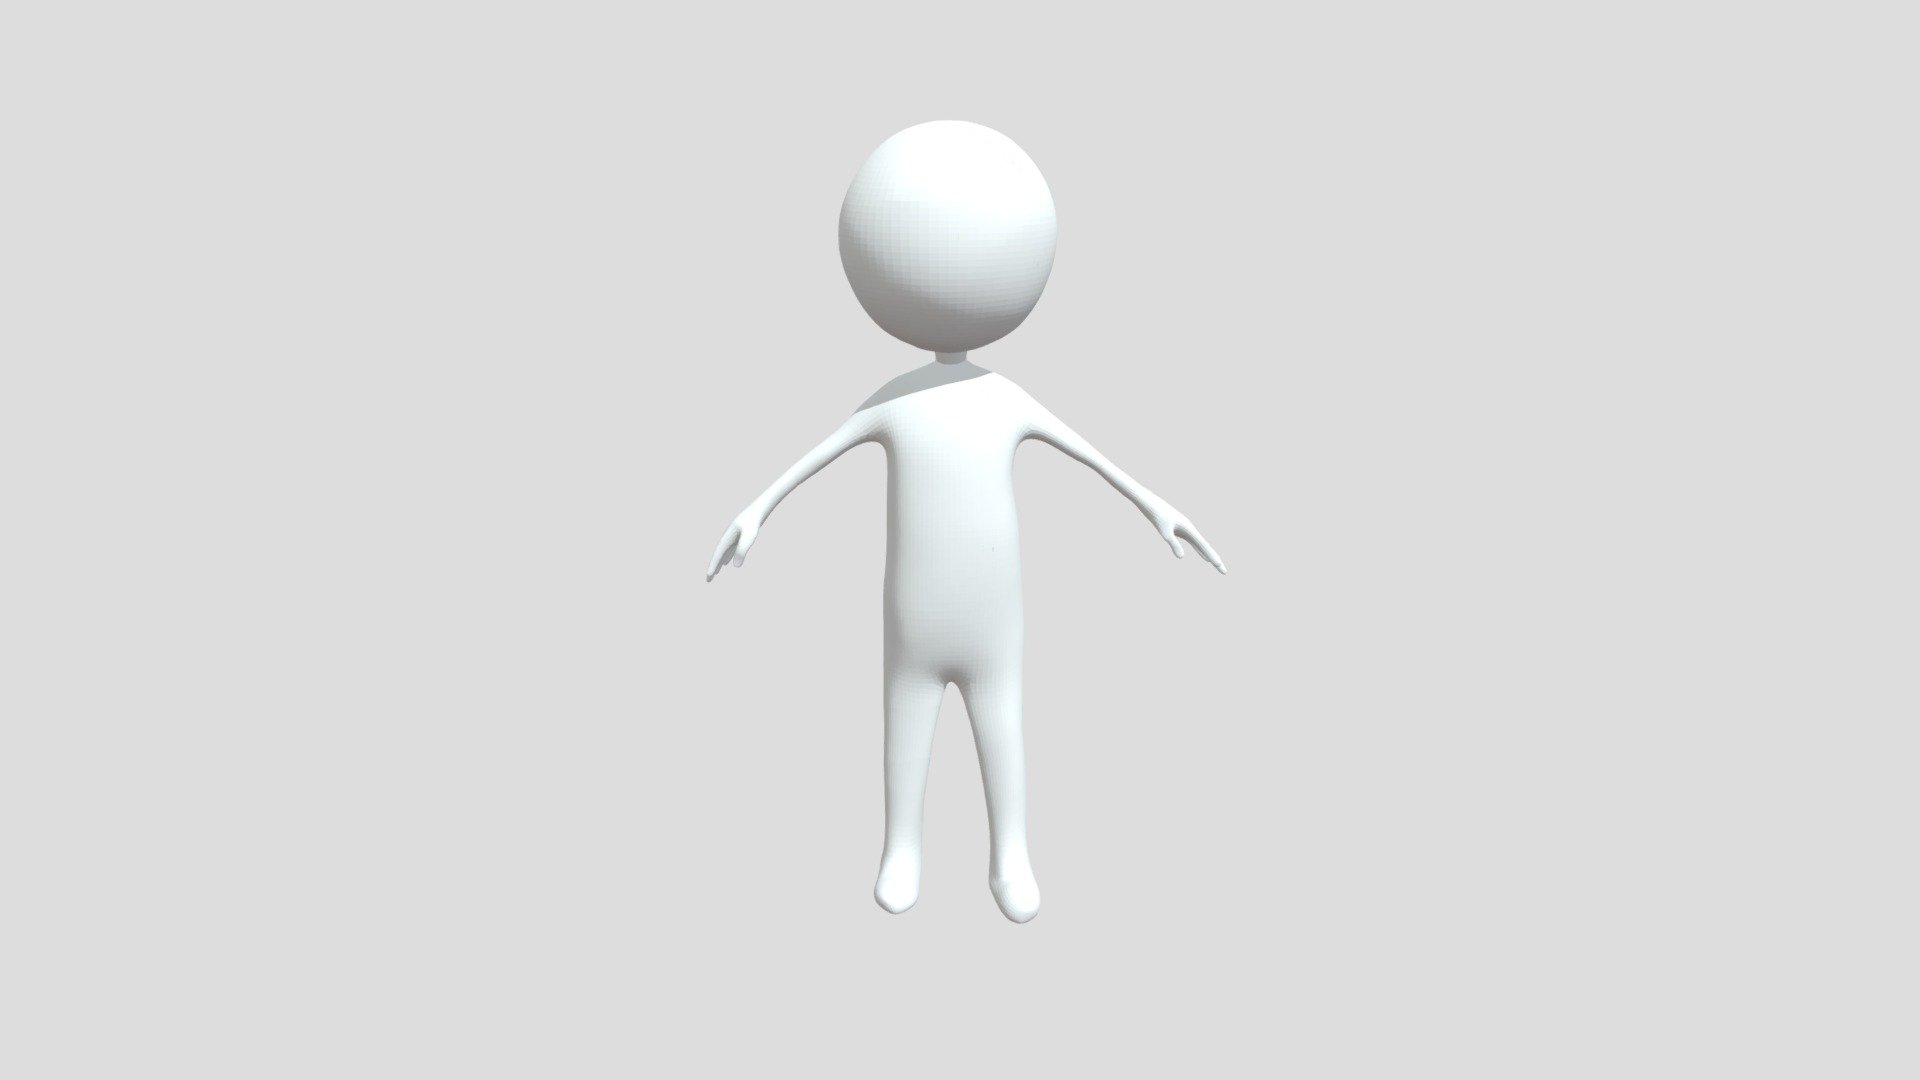 This stickman 3d model is fully rigged including fingers.
This 3d model is develop for blender 3d model